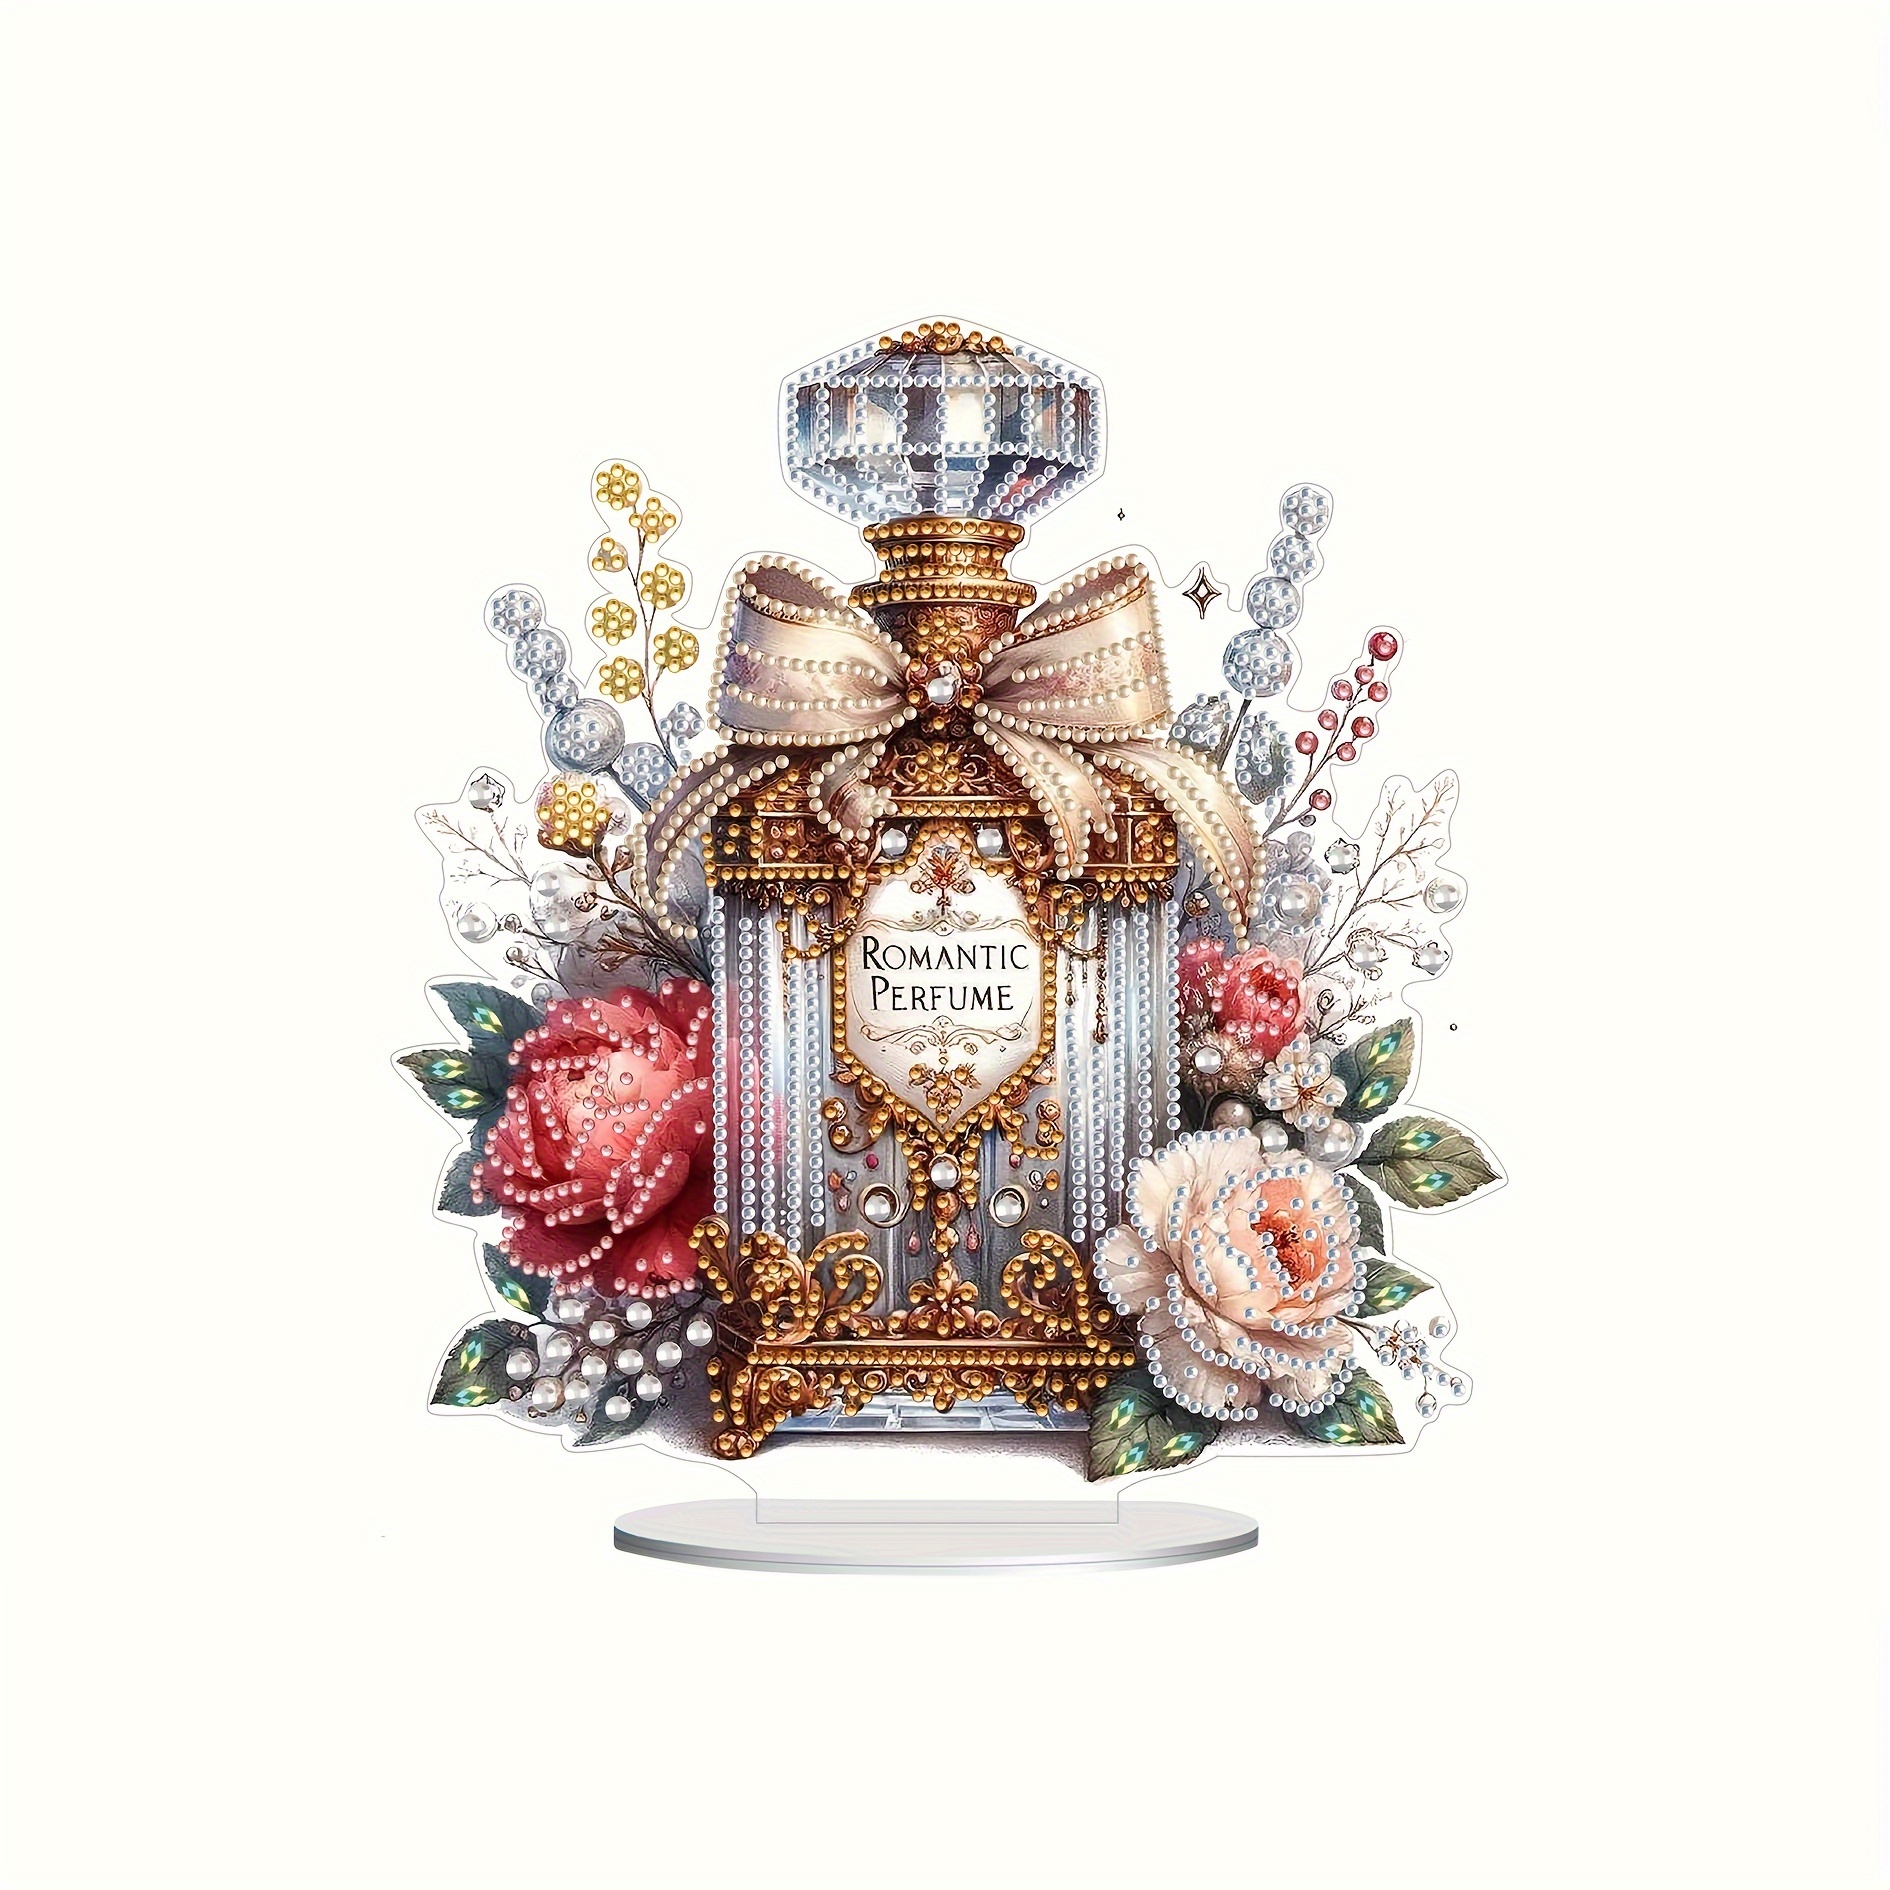 

1pc Romantic Perfume Bottle Diy 5d Diamond Painting Kit, Special Shaped Crystal Rhinestone Embroidery Art, Acrylic Craft For Adults, Home Table Decor With Gift Box